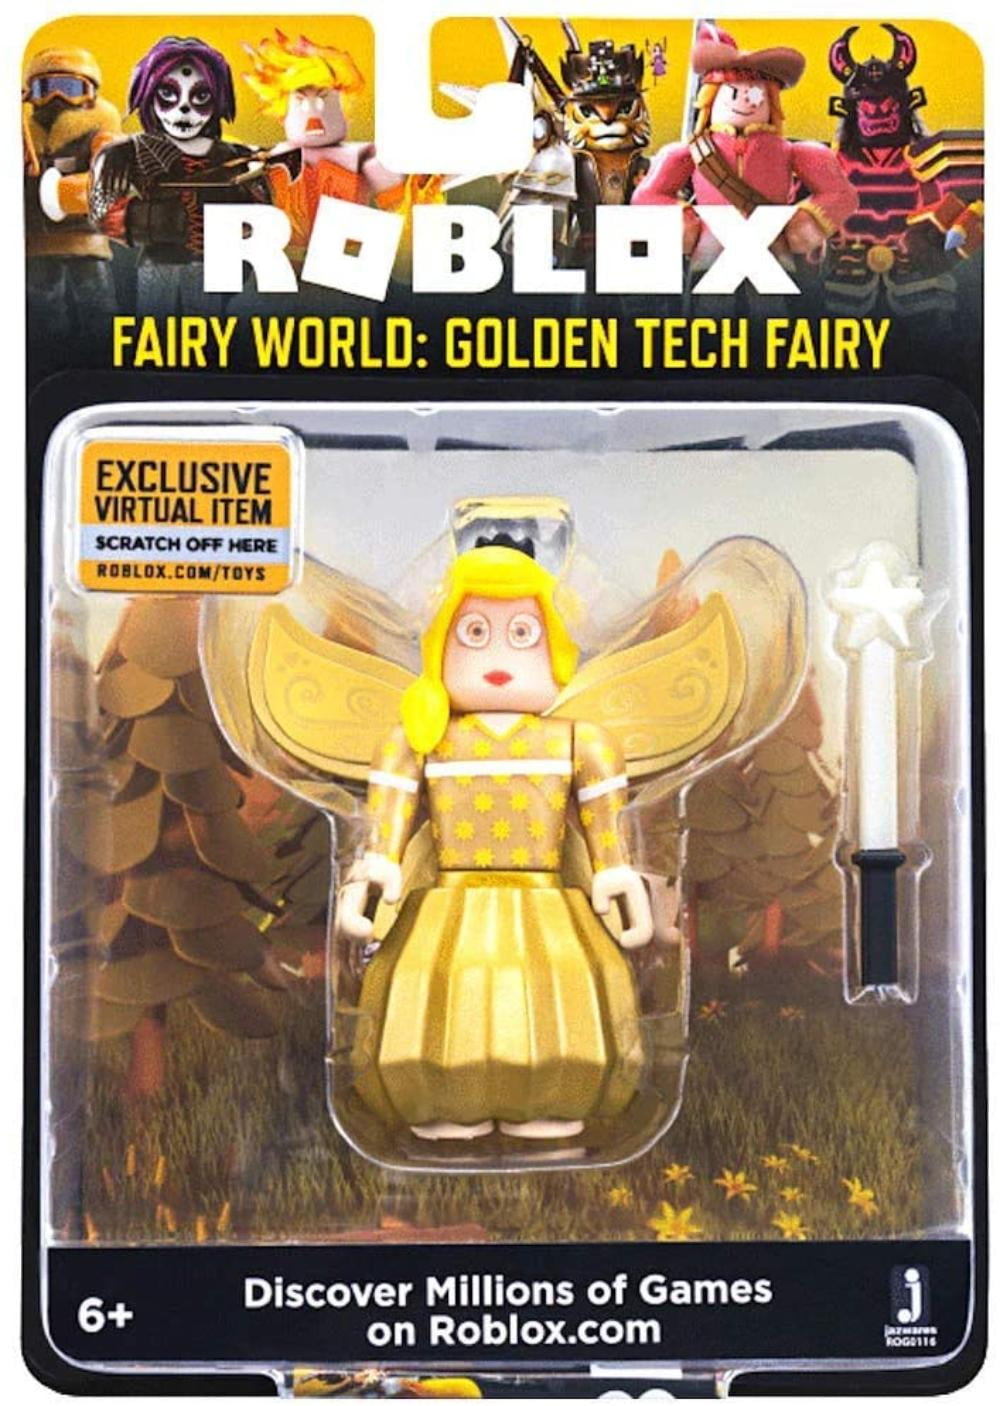 Roblox Fairy World Golden Tech Fairy 2 75 Inch Figure With Exclusive Virtual Item Code What Happens When You Mix The Latest Innovations In By Brand Roblox Walmart Com Walmart Com - golden man roblox